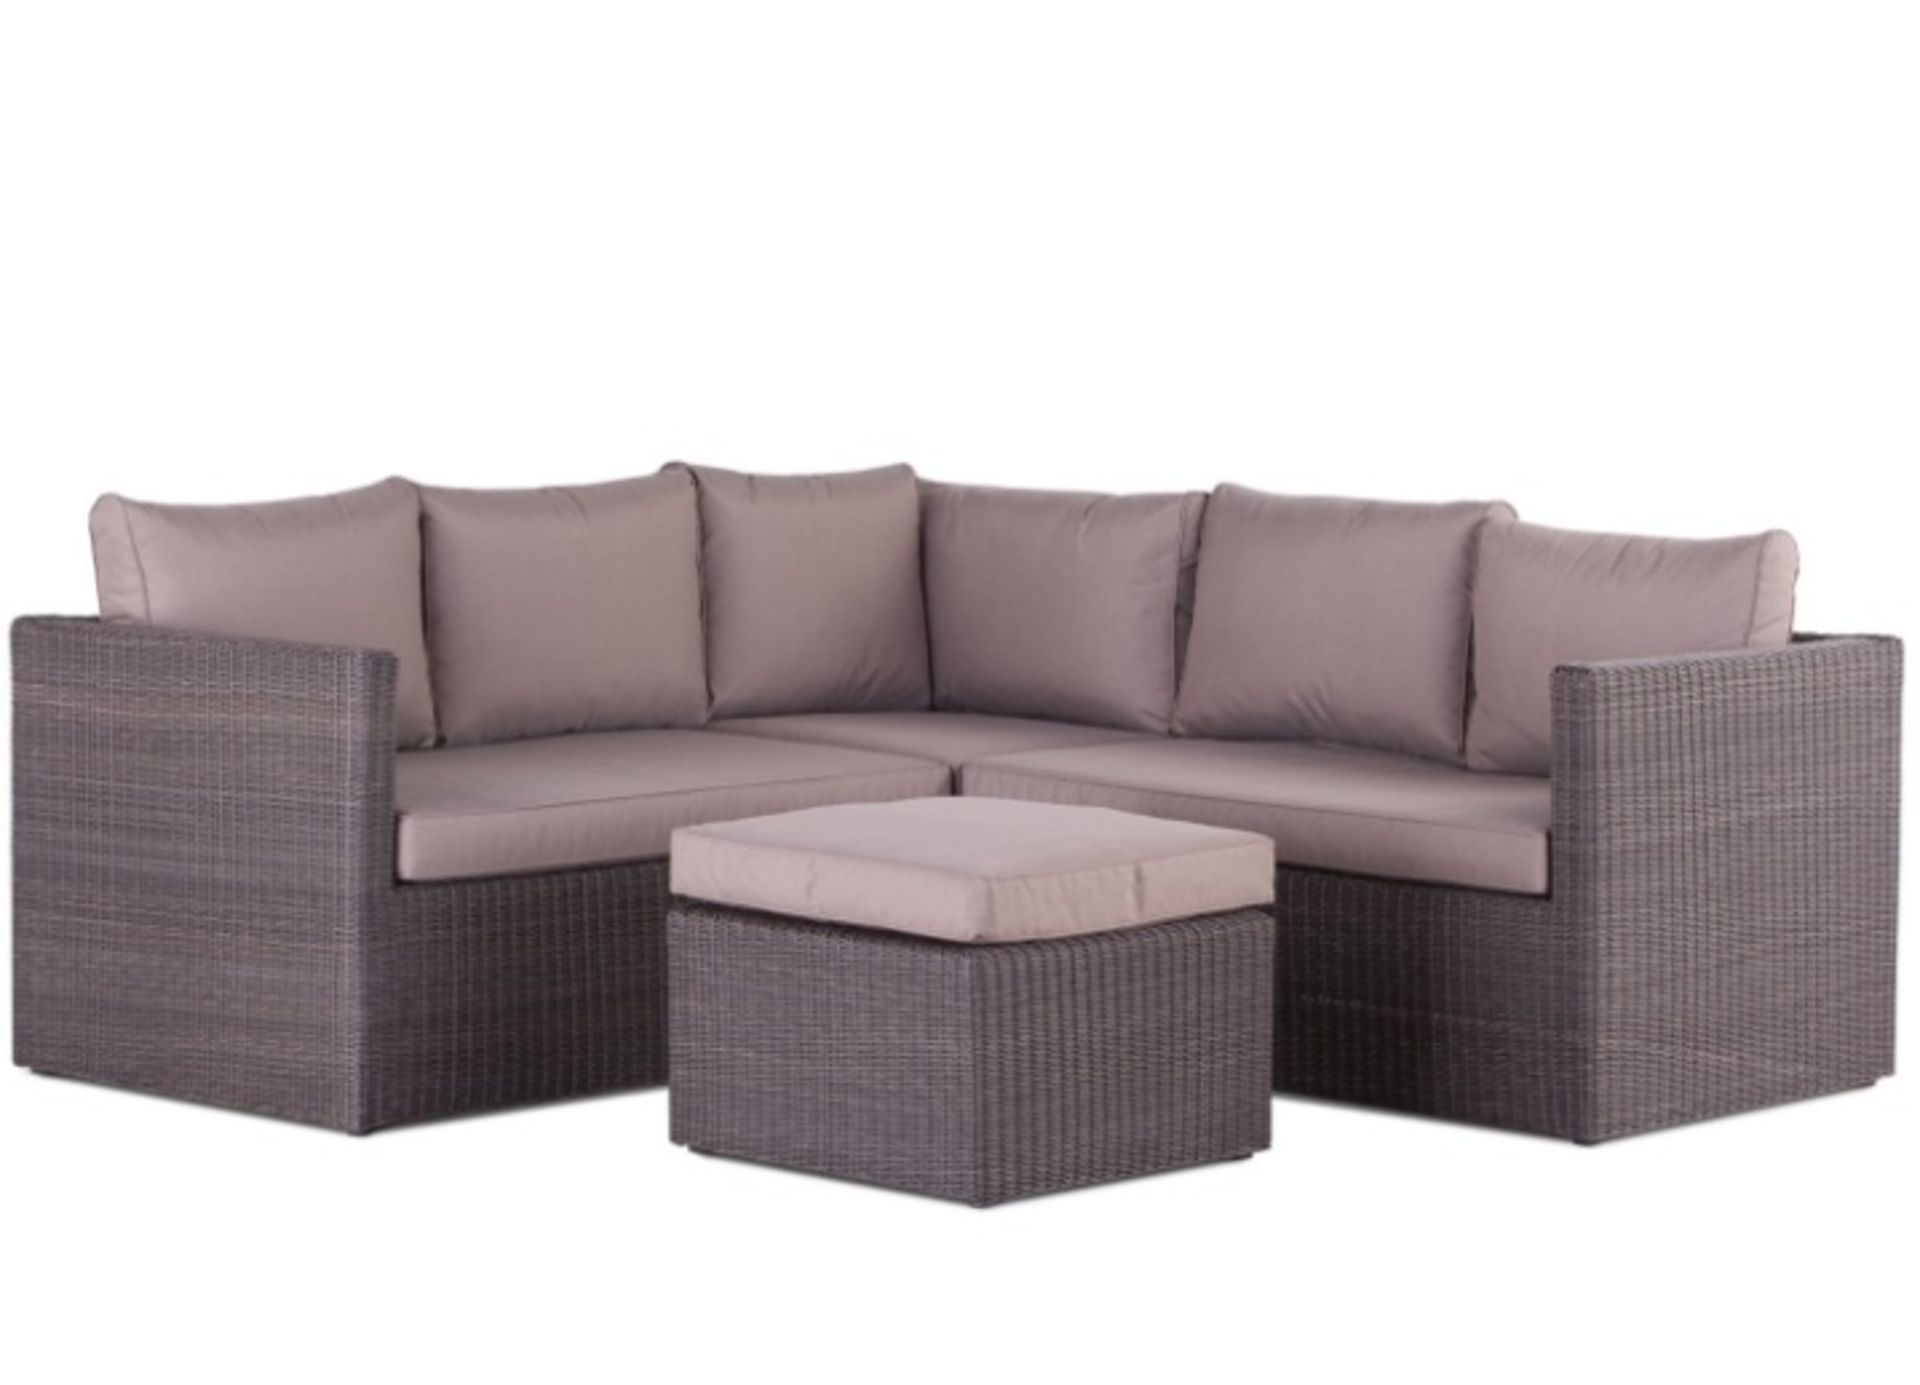 V Brand New St Tropez 4pc Corner Set With Coffee Table Includes All Cushions - Hand Woven In 3mm